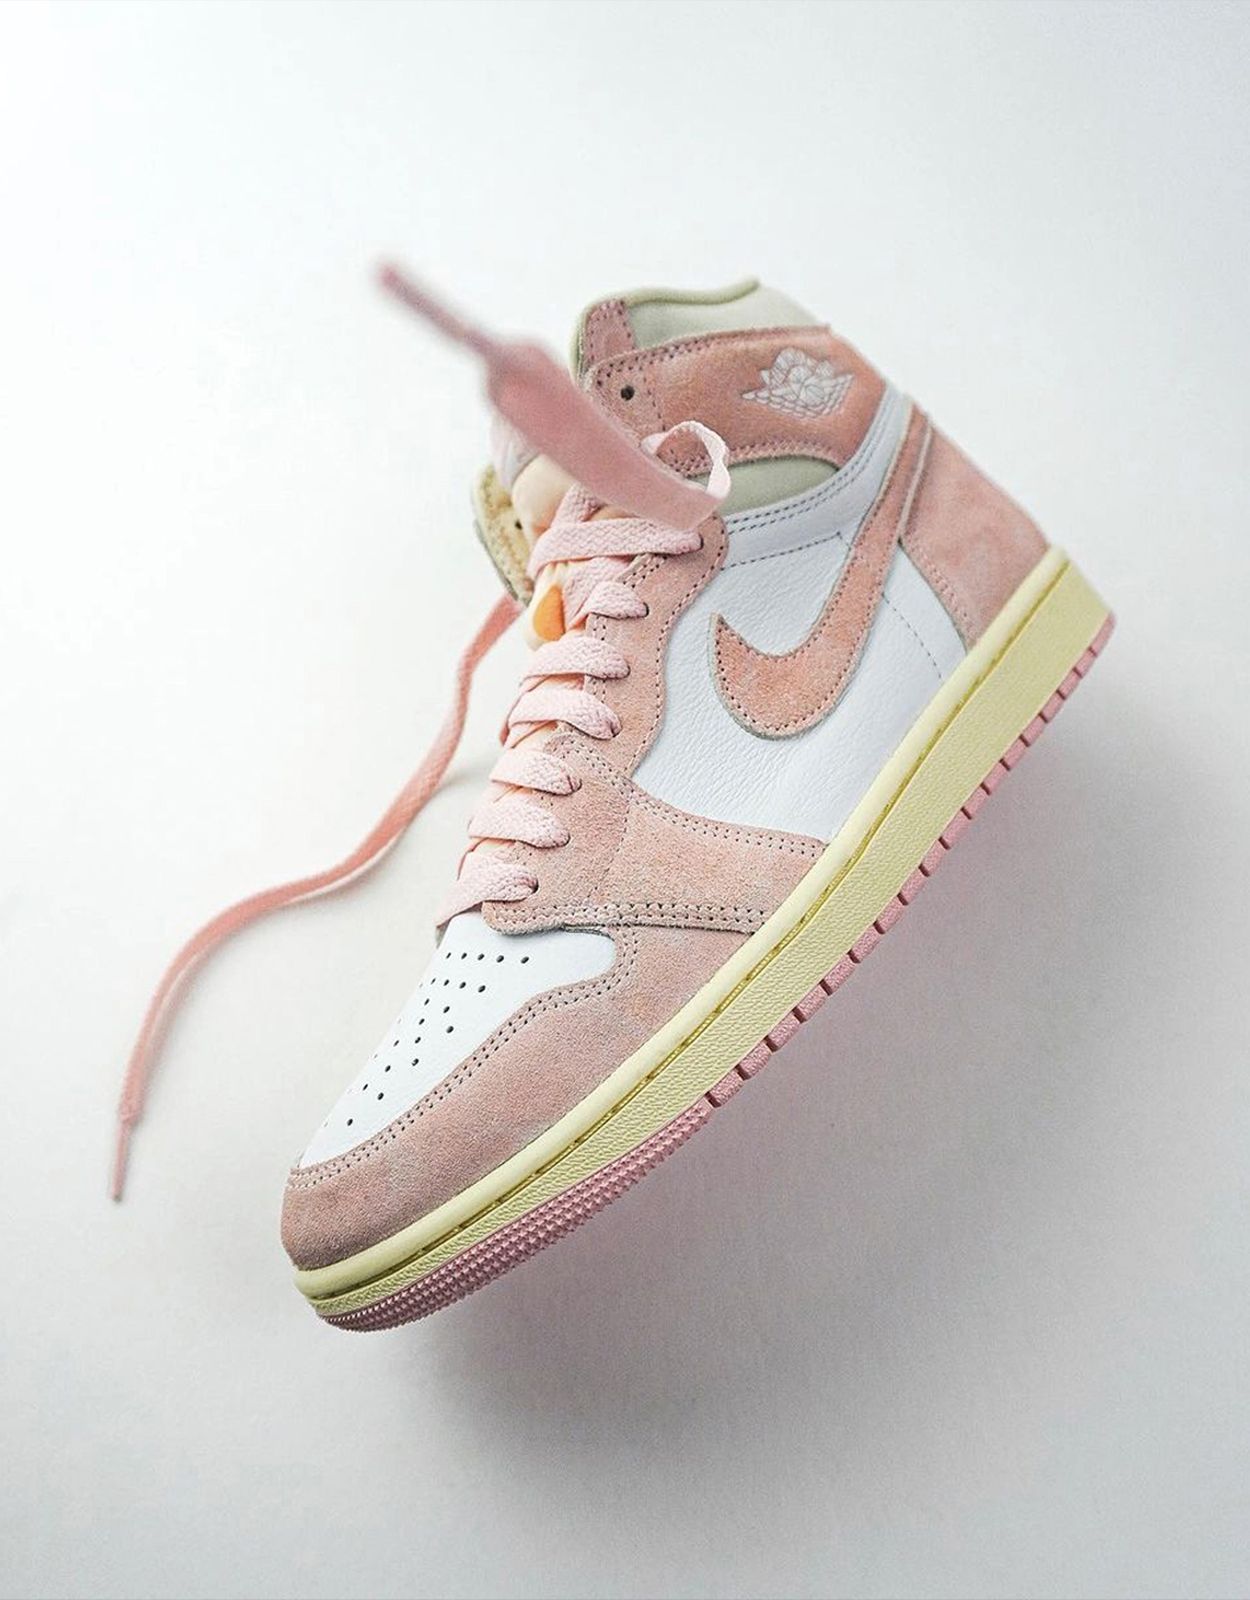 Where to Buy the Air Jordan 1 High OG “Washed Pink” | House of Heat°